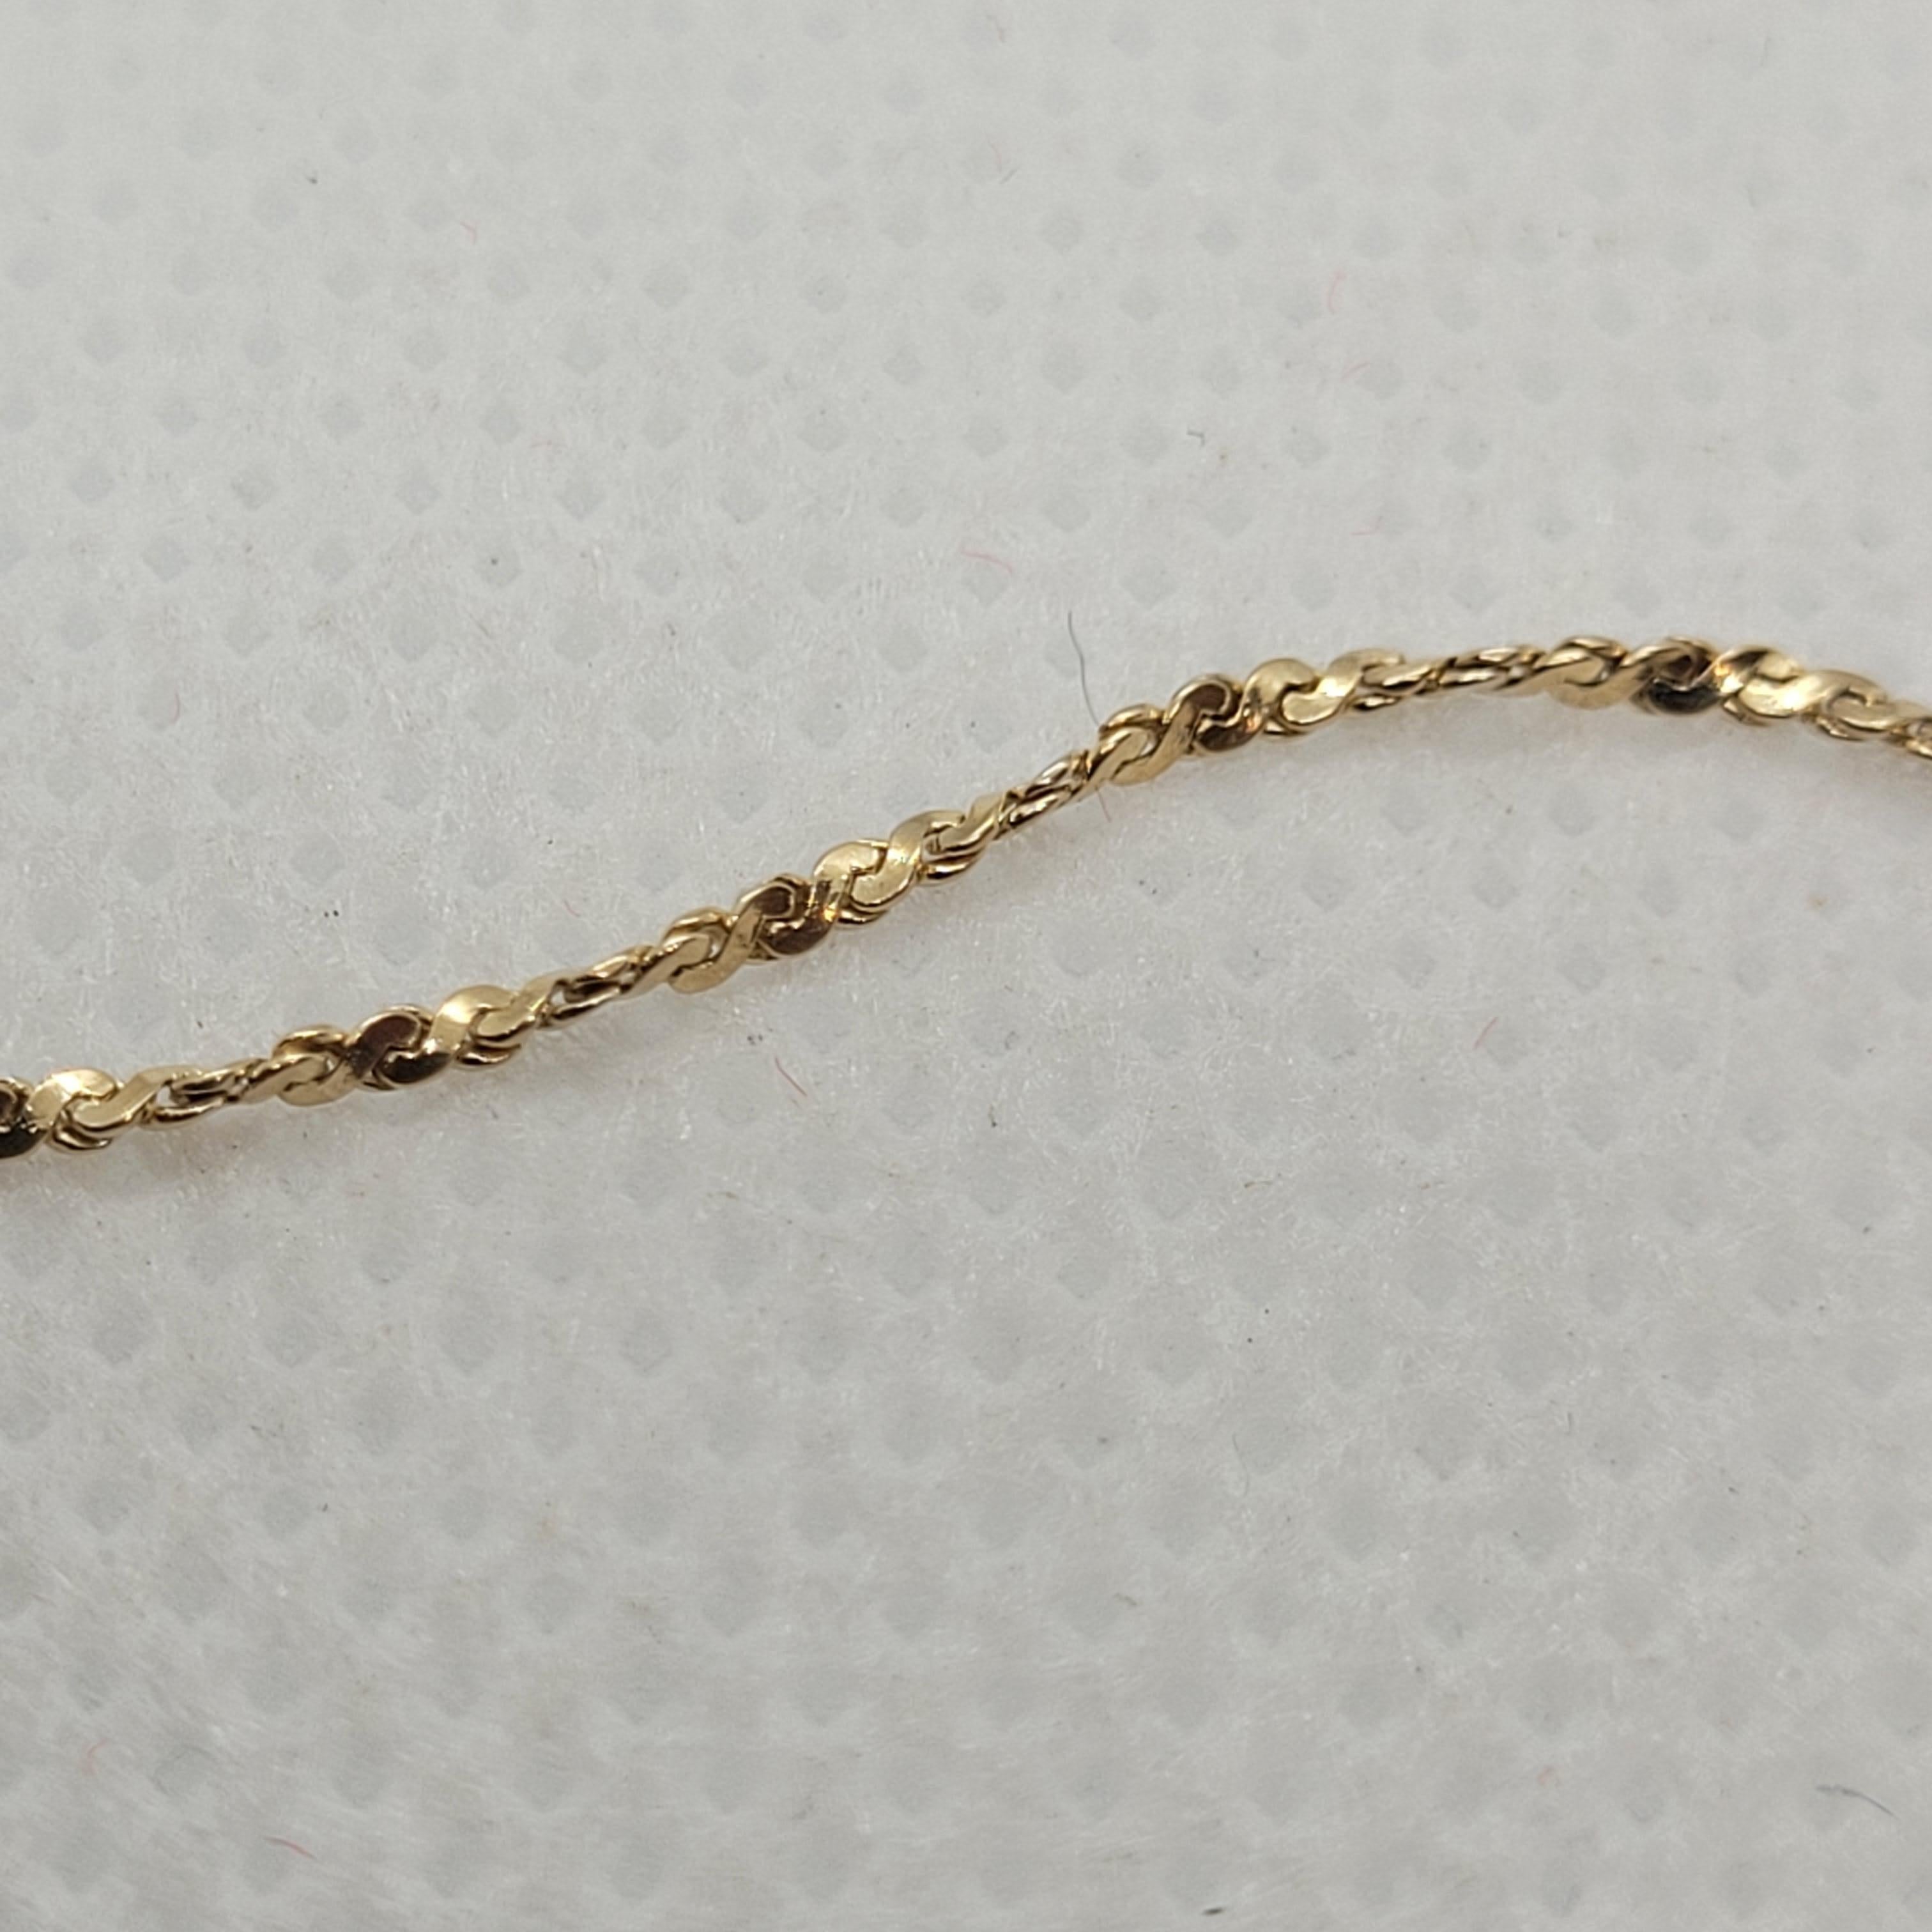 16-inch 14kt yellow gold twisted figure-8 link chain that is 1mm wide, stamped 14kt BGI, secured with a lobster clasp, and weighs 2 grams. This is a versatile lightweight chain and in very good condition. Please let us know if you have any